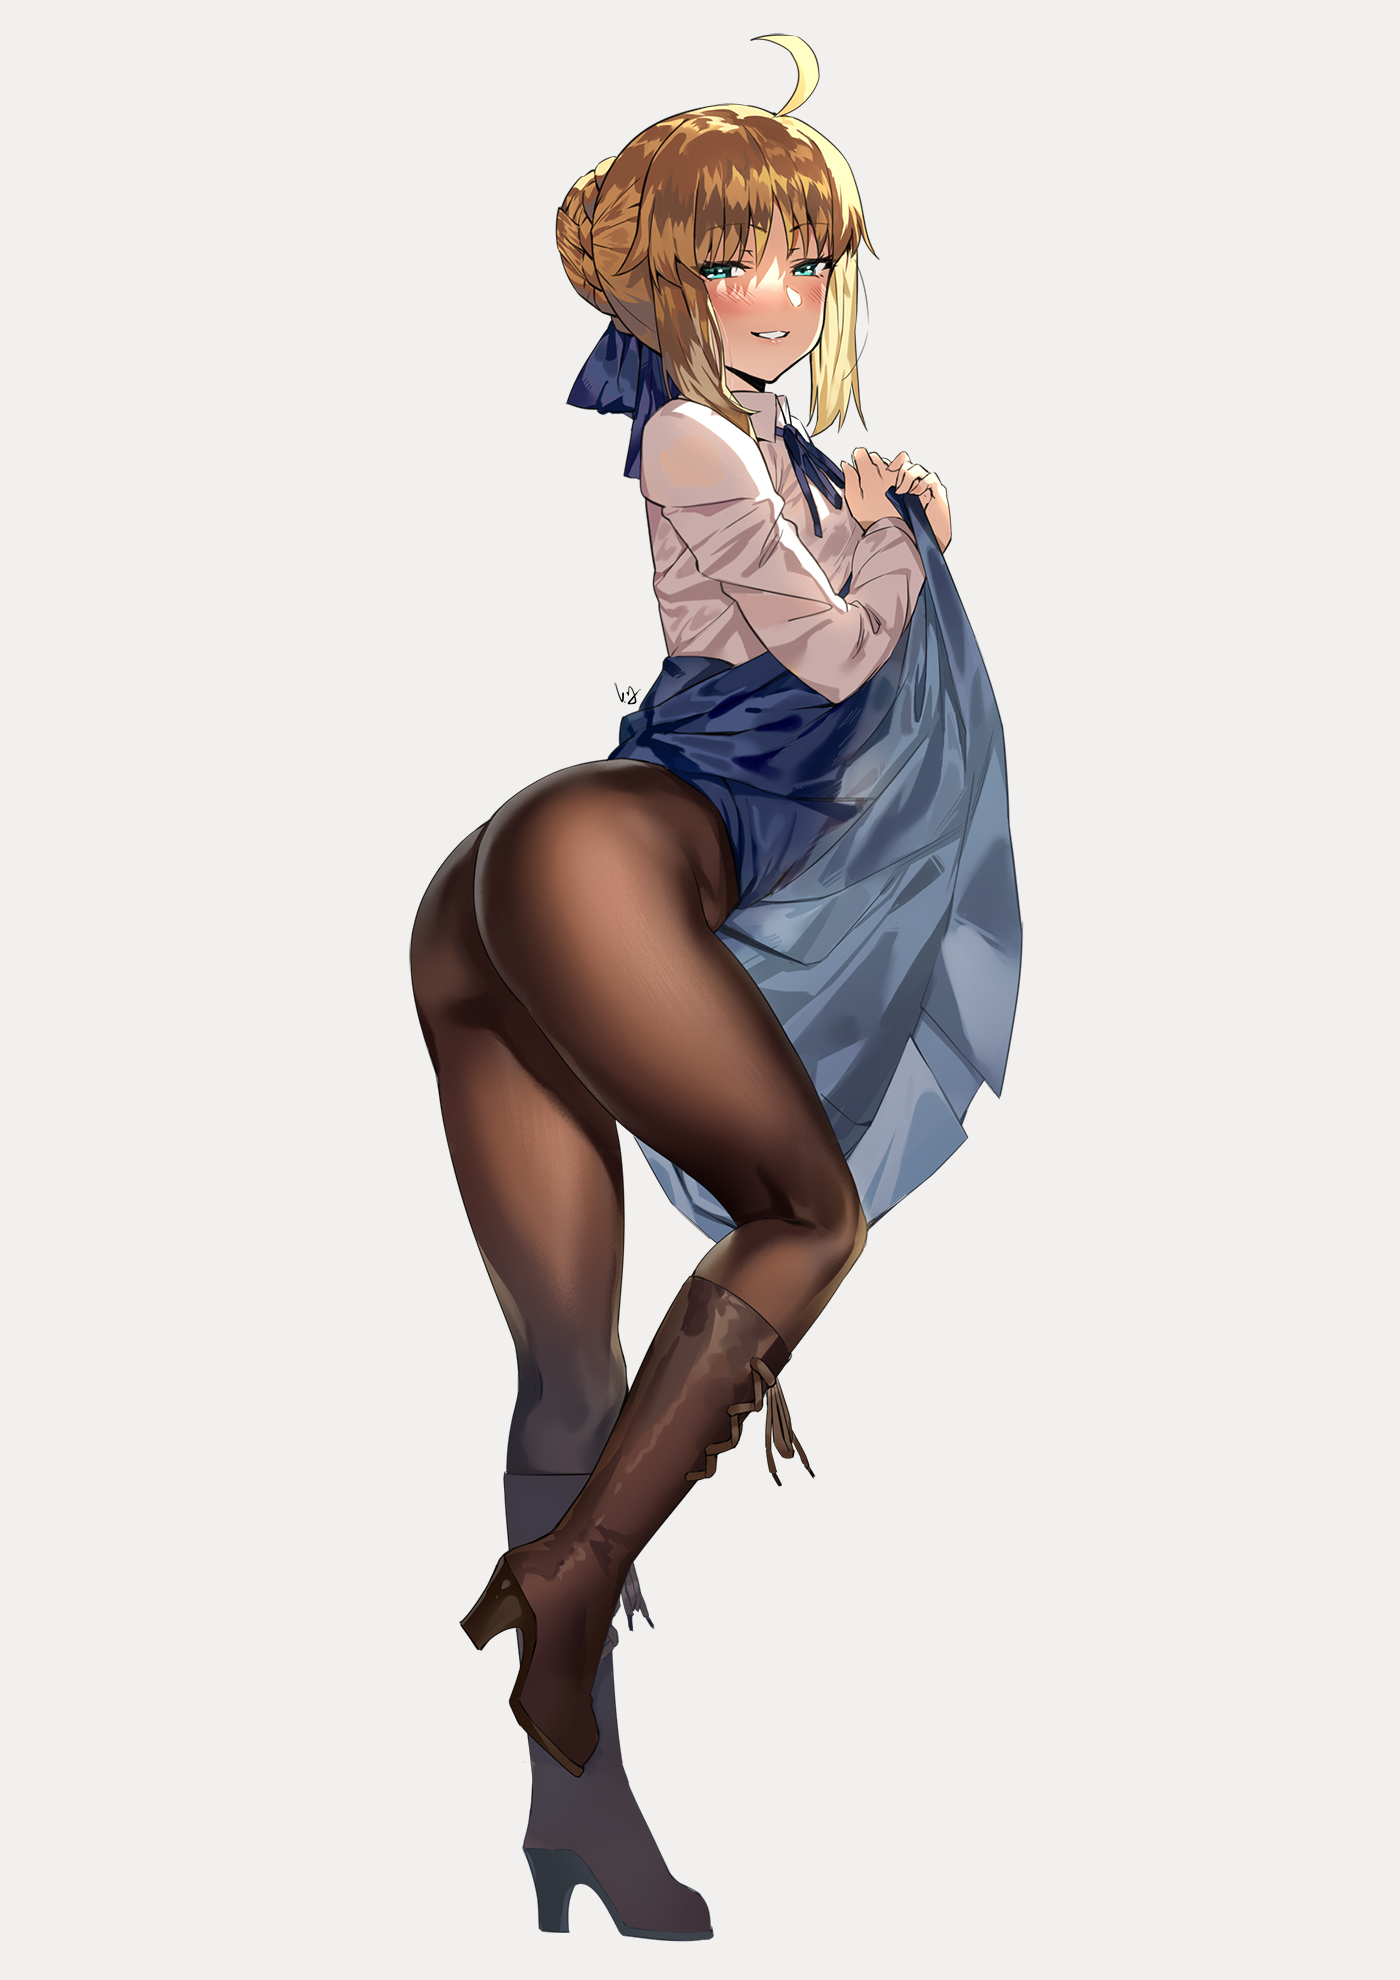 Anime 1400x1980 Fate series Fate/Stay Night anime girls blushing long hair pantyhose 2D Saber thighs fan art heels portrait display ecchi glutes thick thigh the gap ahoge ass thick ass Club3 Artoria Pendragon black socks  nopan brown boots braids blonde embarrassed looking at viewer smiling thigh high boots curvy